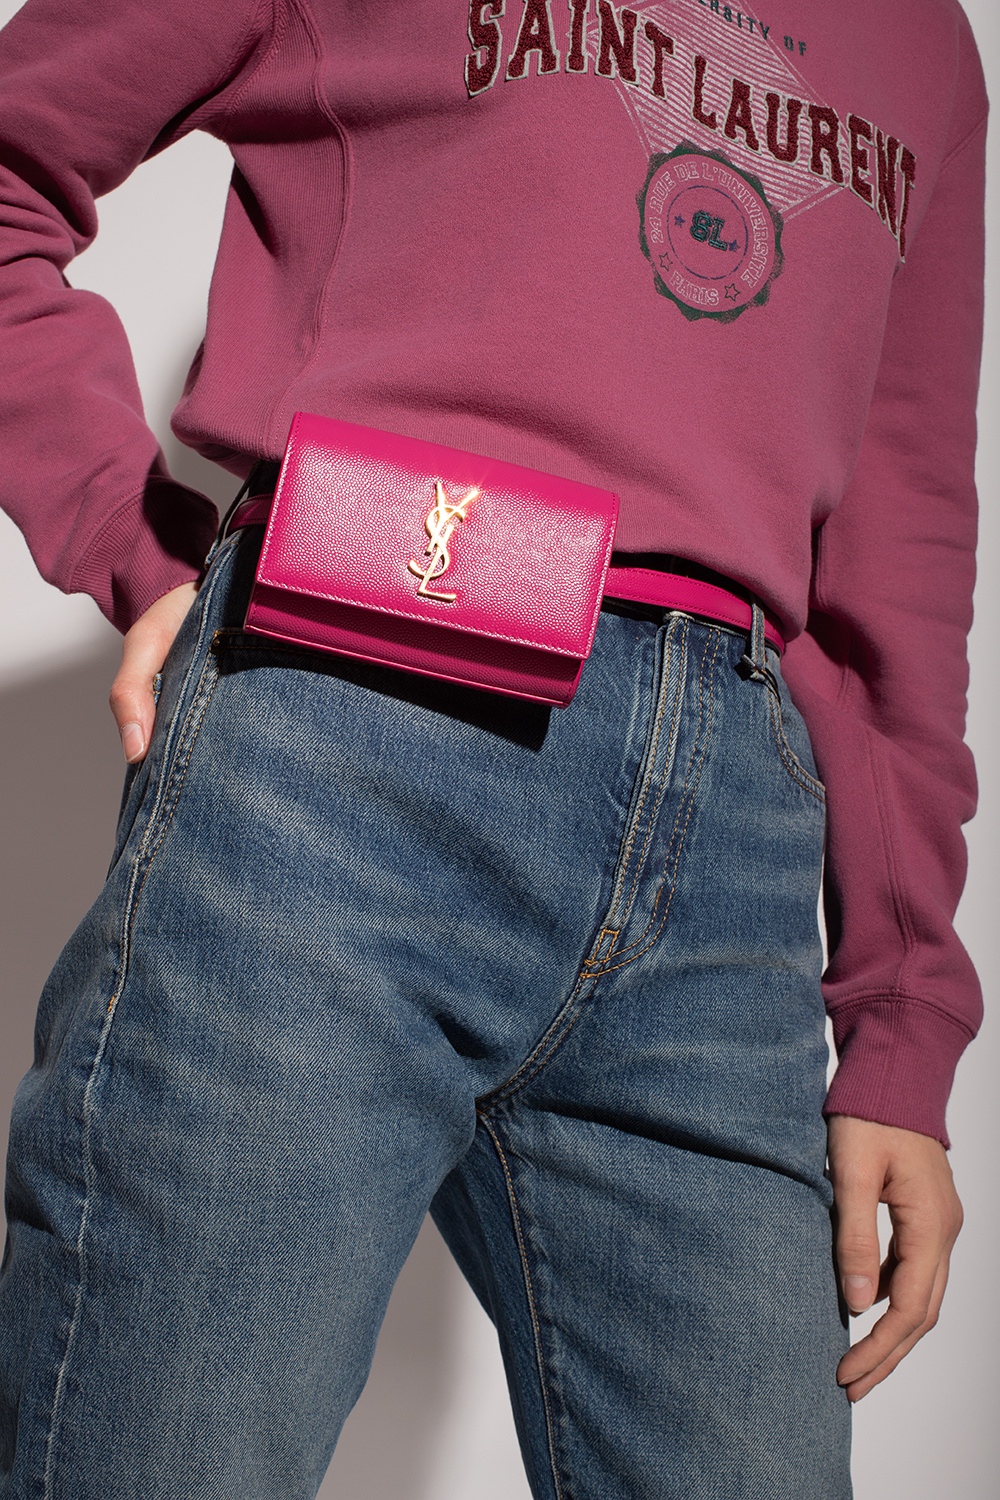 How to Wear the YSL Kate Belt Bag